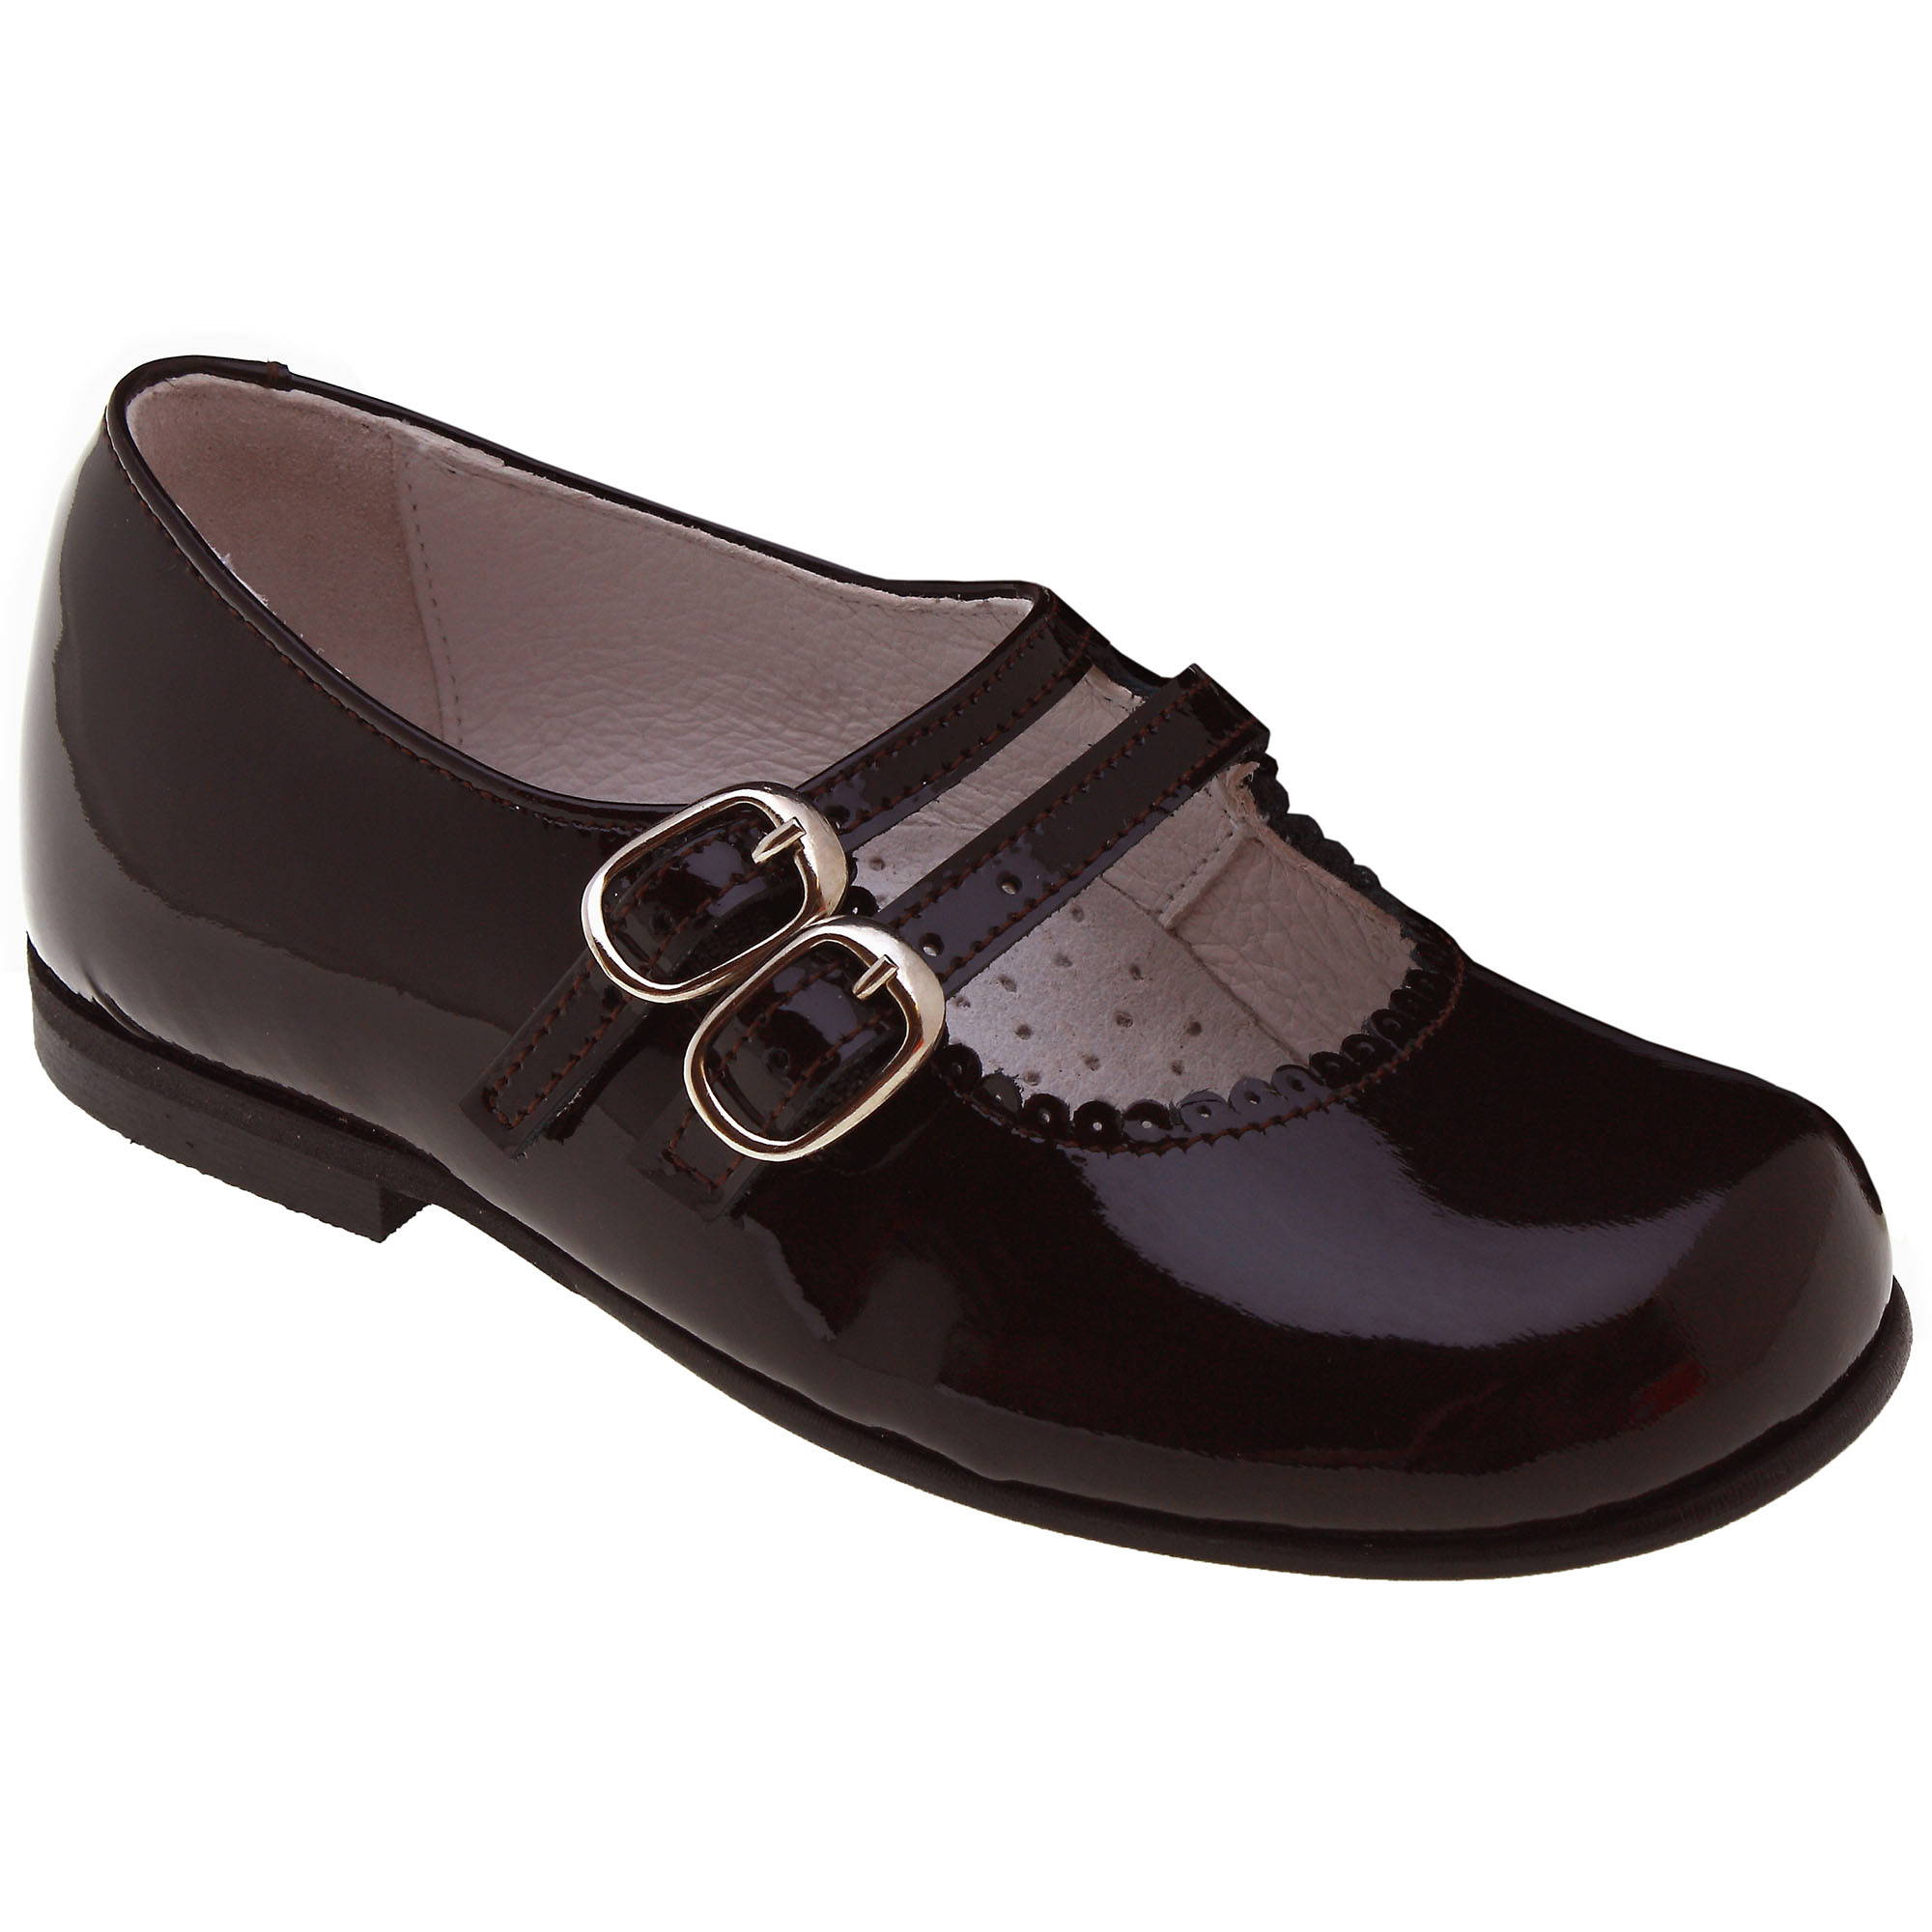 Girls Dark Brown Patent Shoes Leather Double Straps Mary